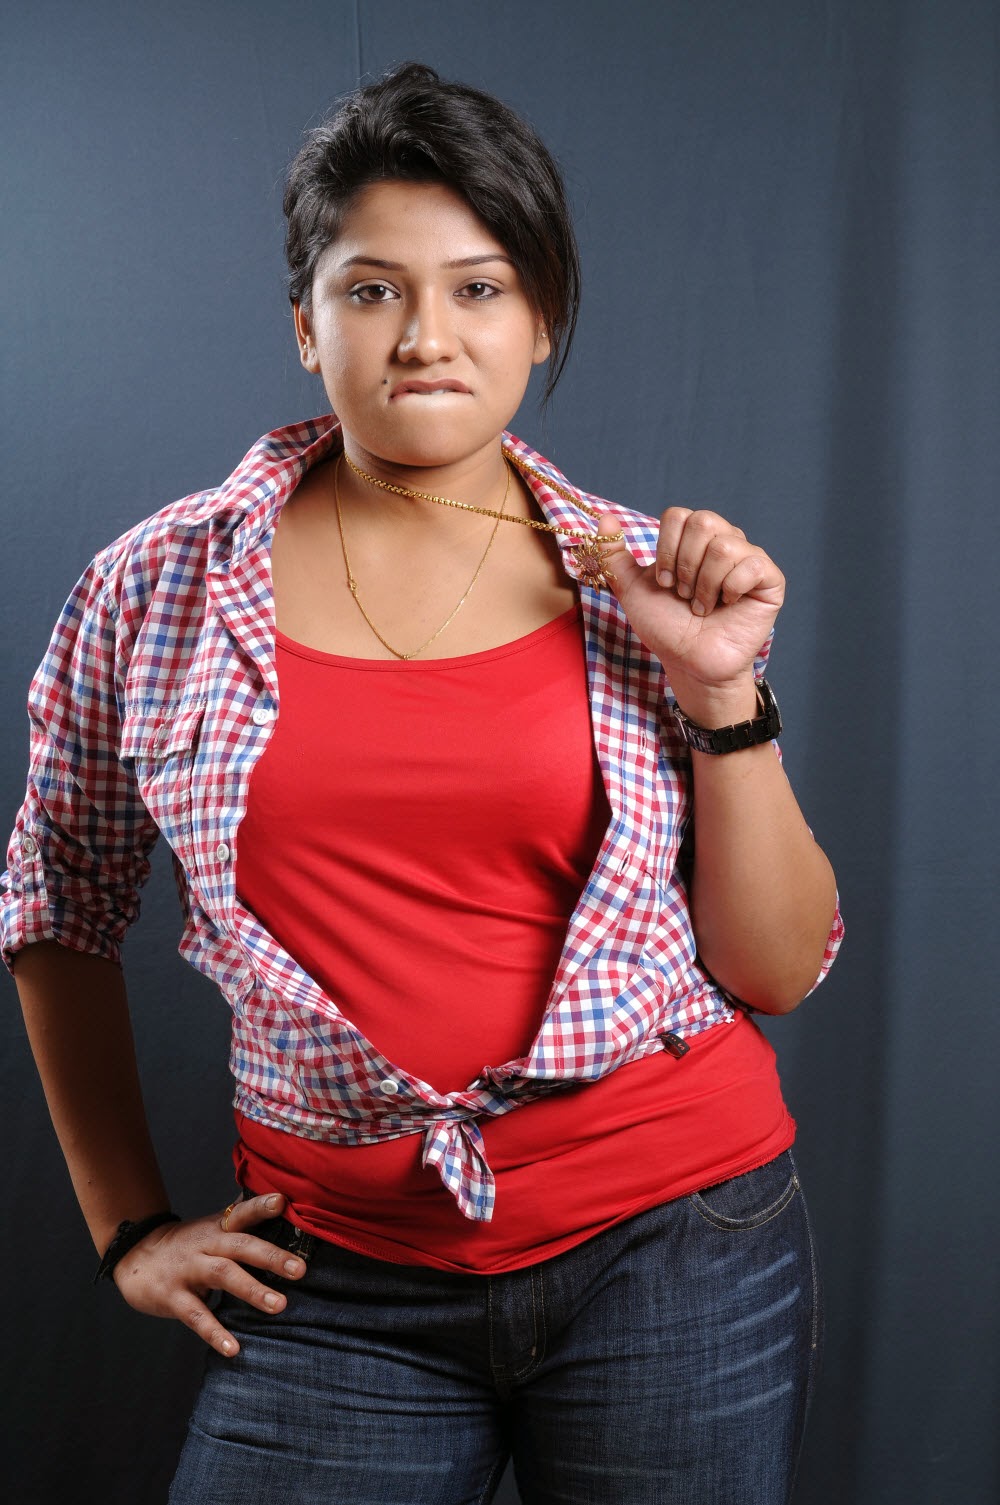 Jyothi Sizzling Hot Photo Gallery Jyothi Tollywood Actress All 